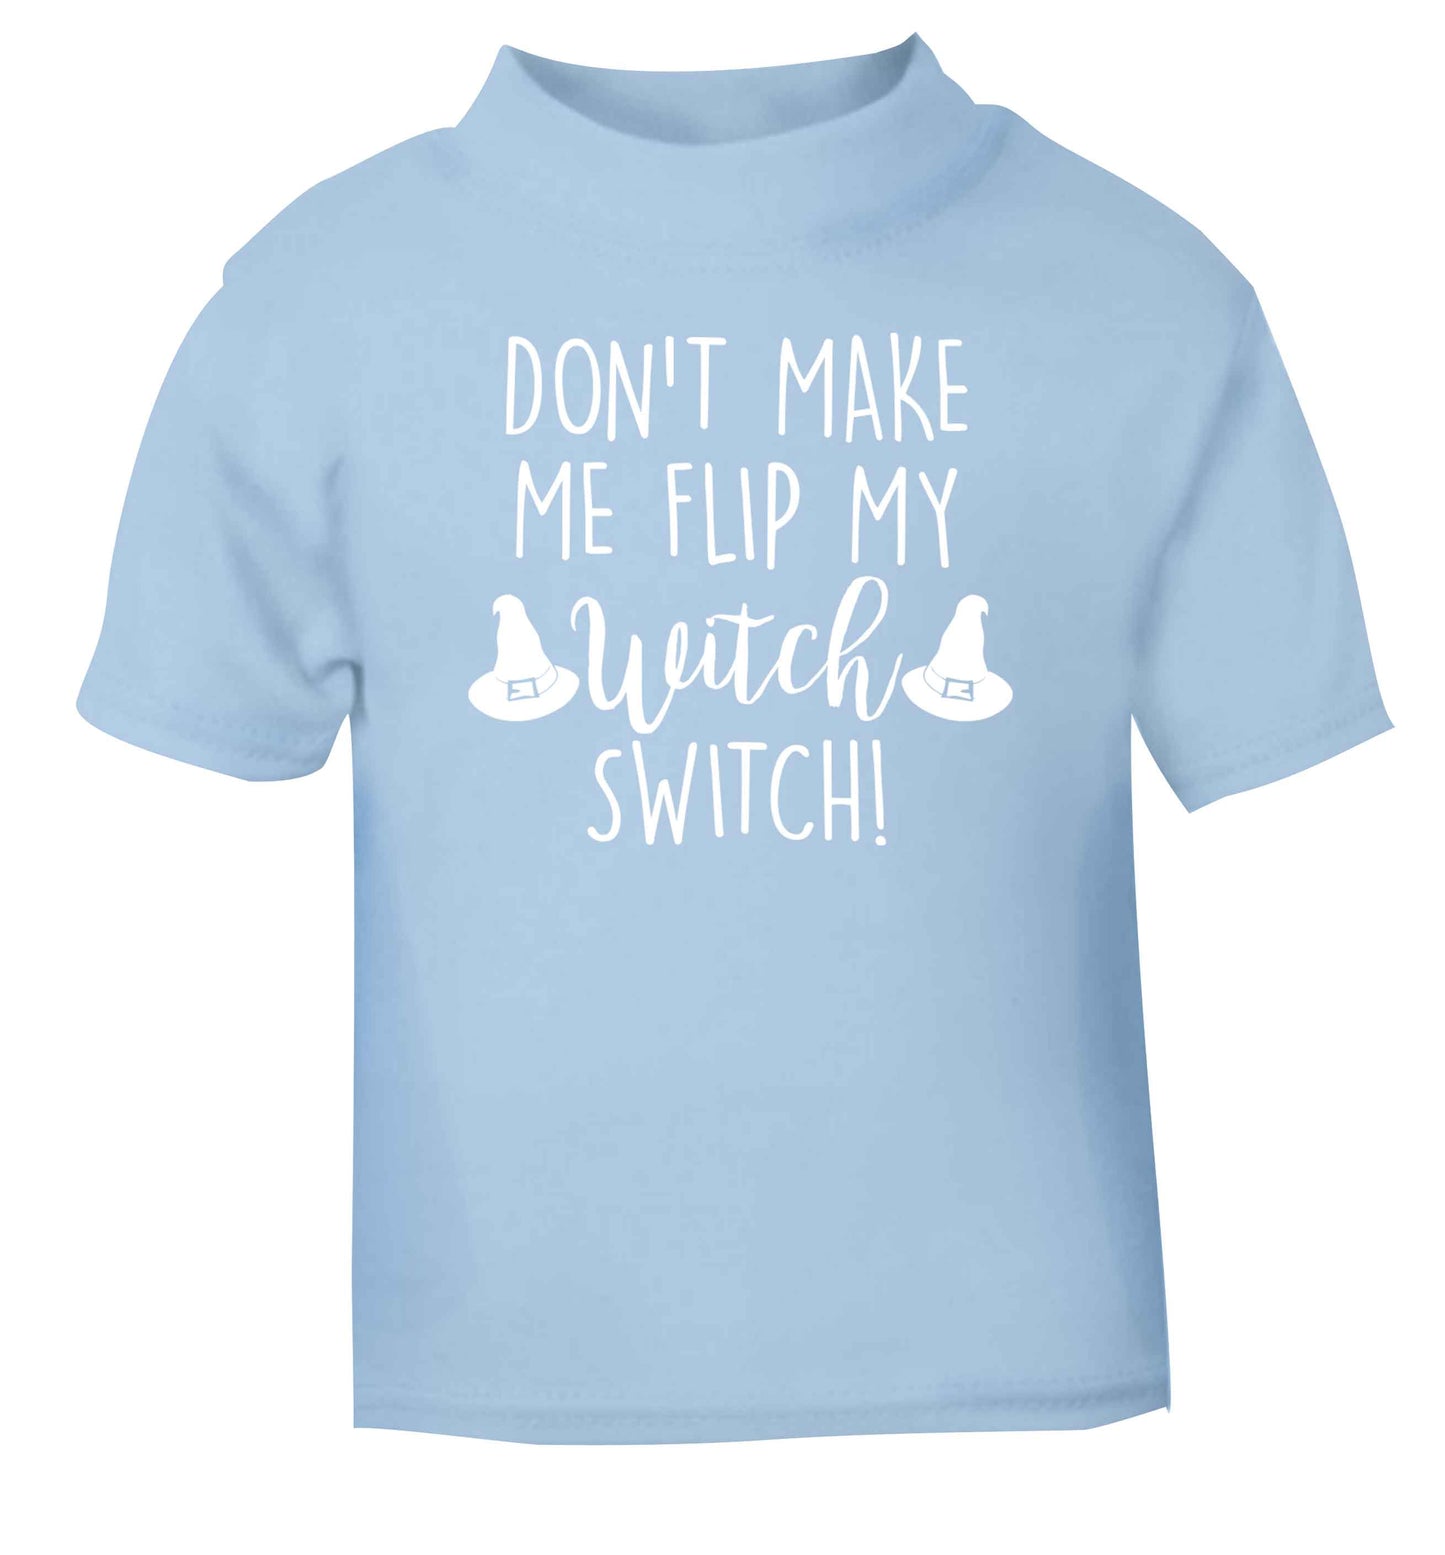 Don't make me flip my witch switch light blue baby toddler Tshirt 2 Years